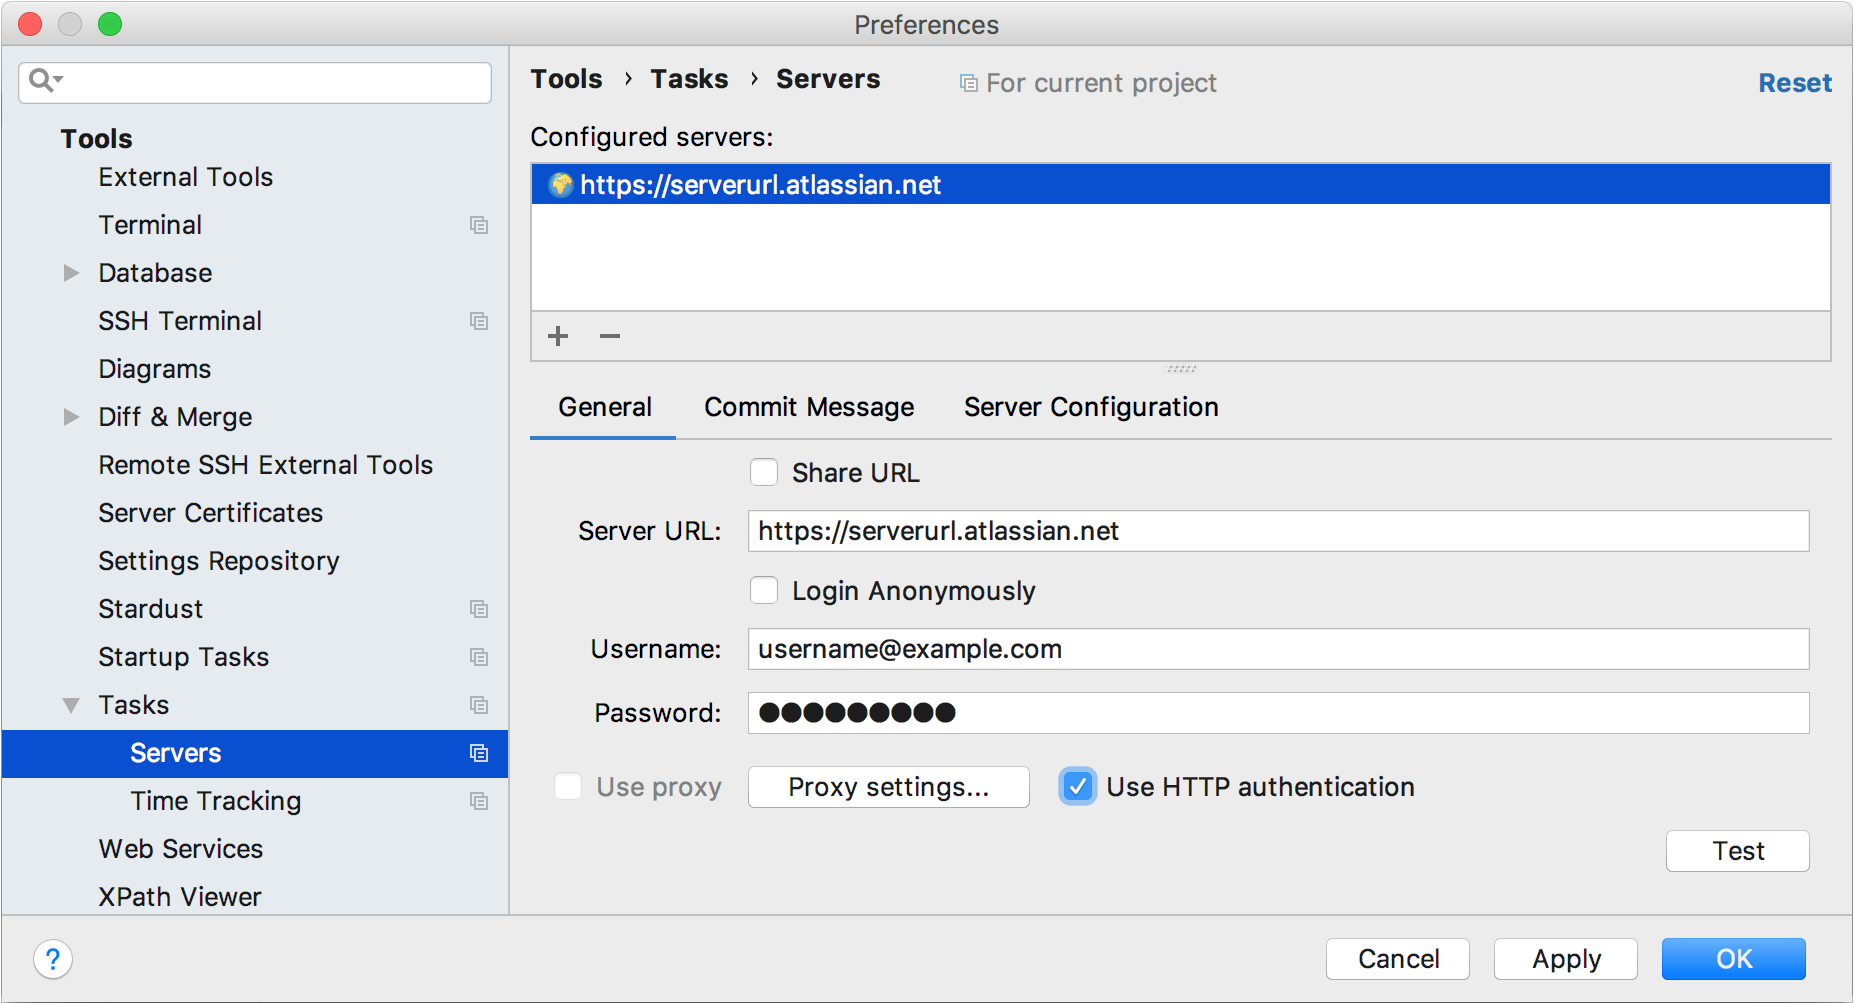 Specifying server URL and credentials